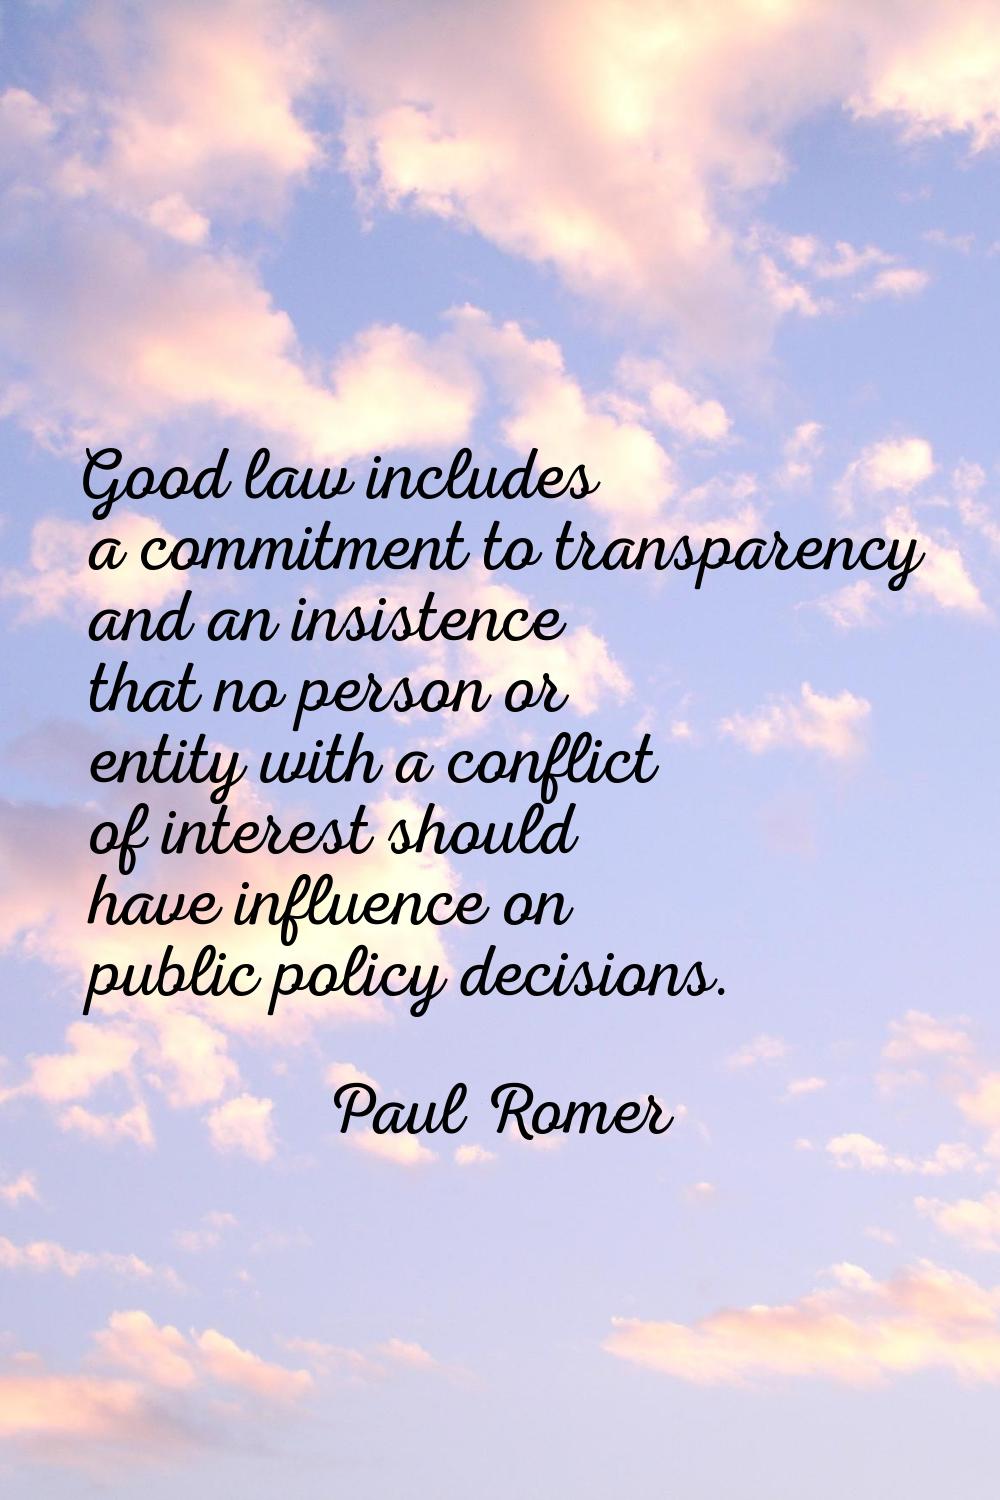 Good law includes a commitment to transparency and an insistence that no person or entity with a co